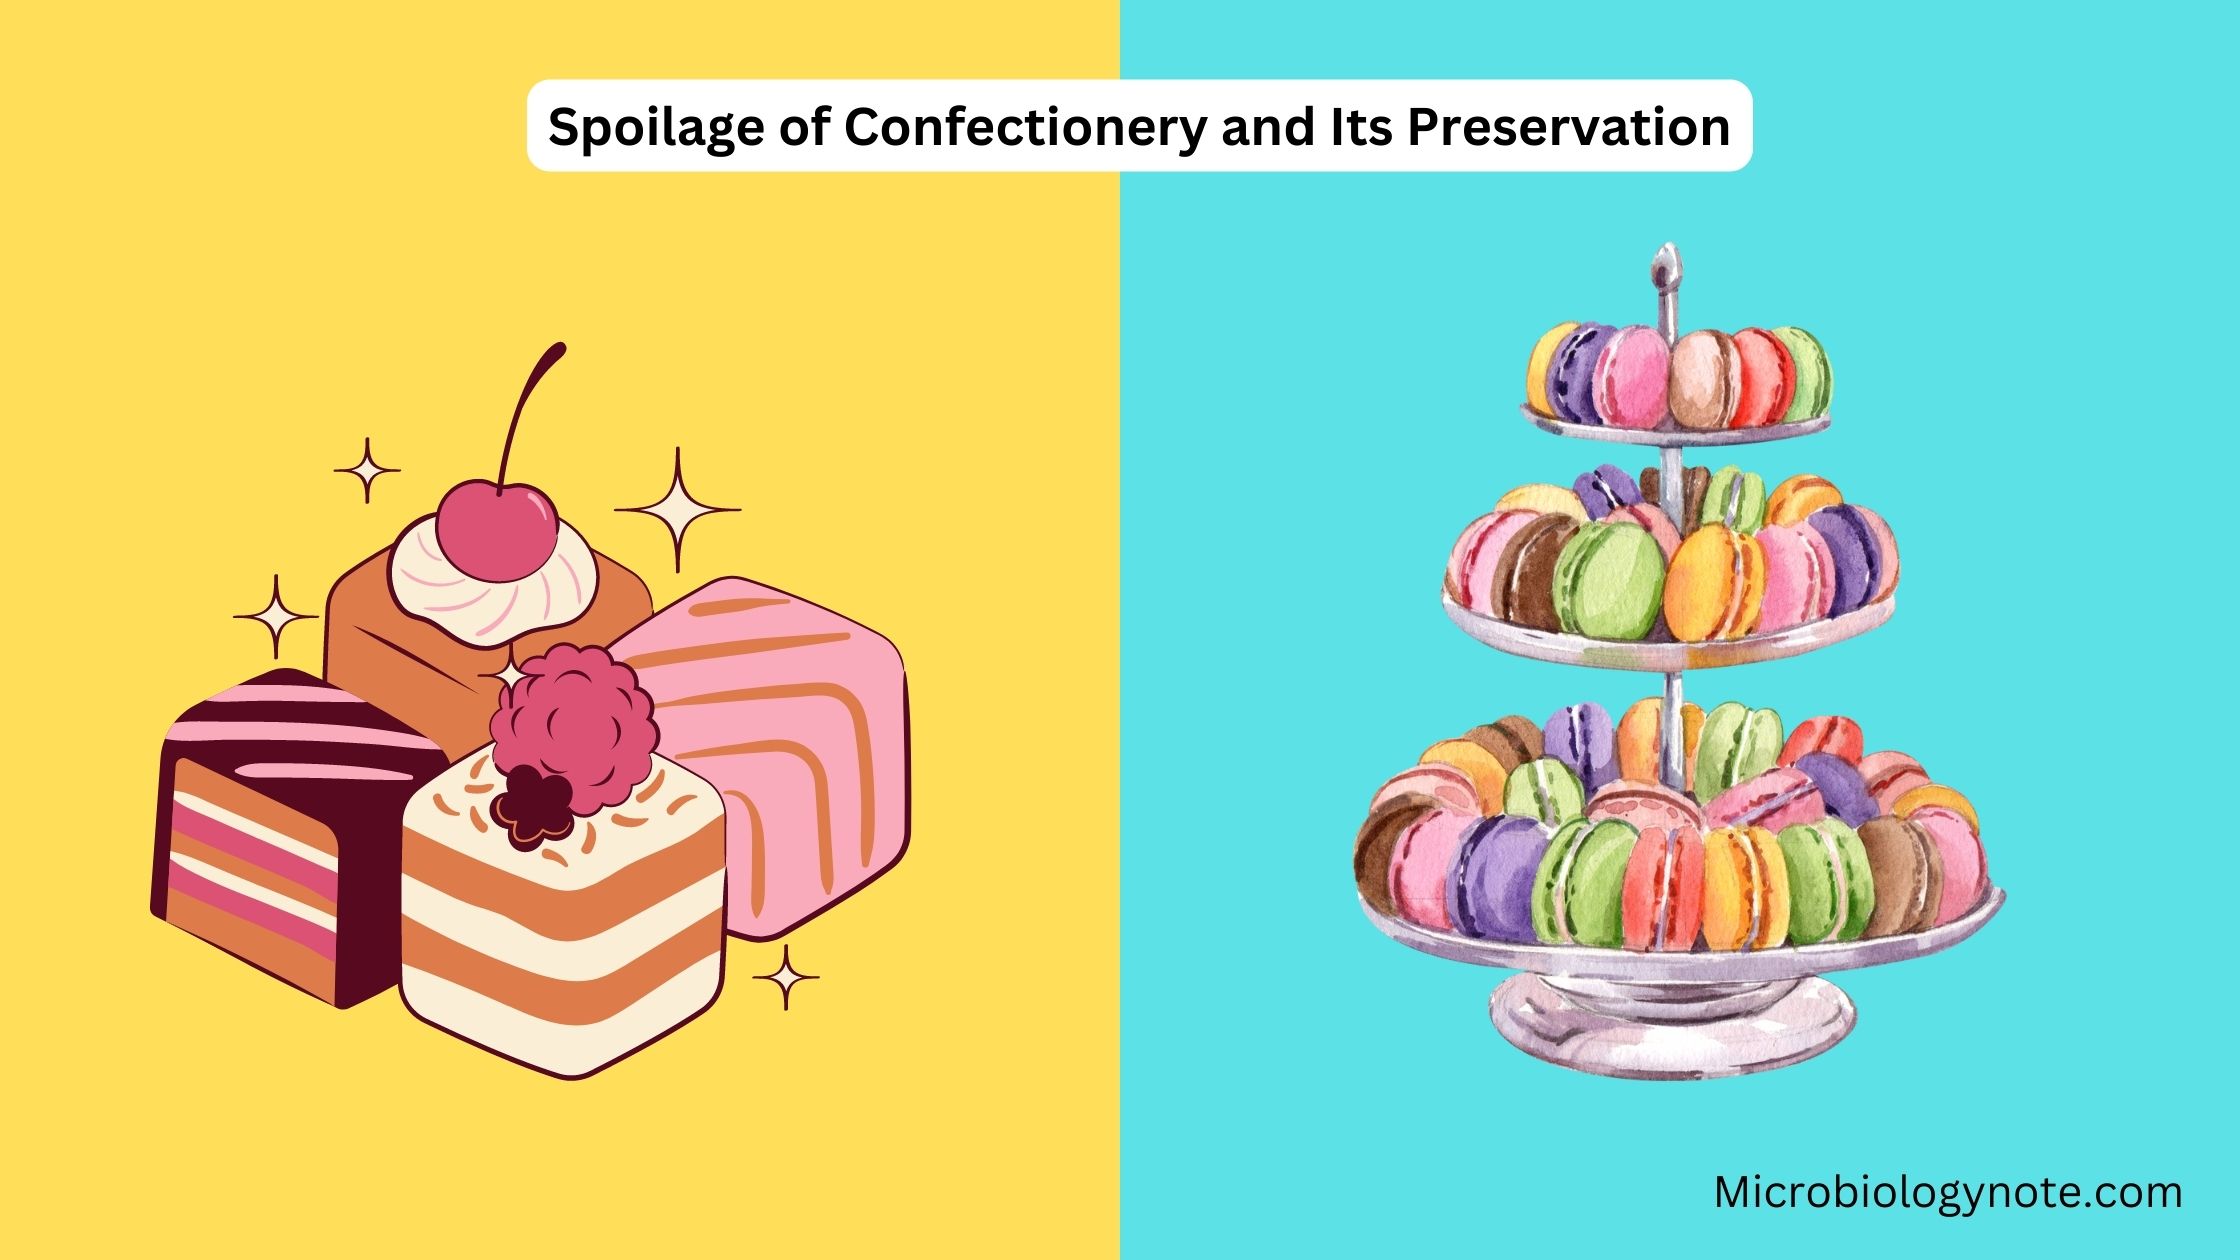 Spoilage of Confectionery and Its Preservation